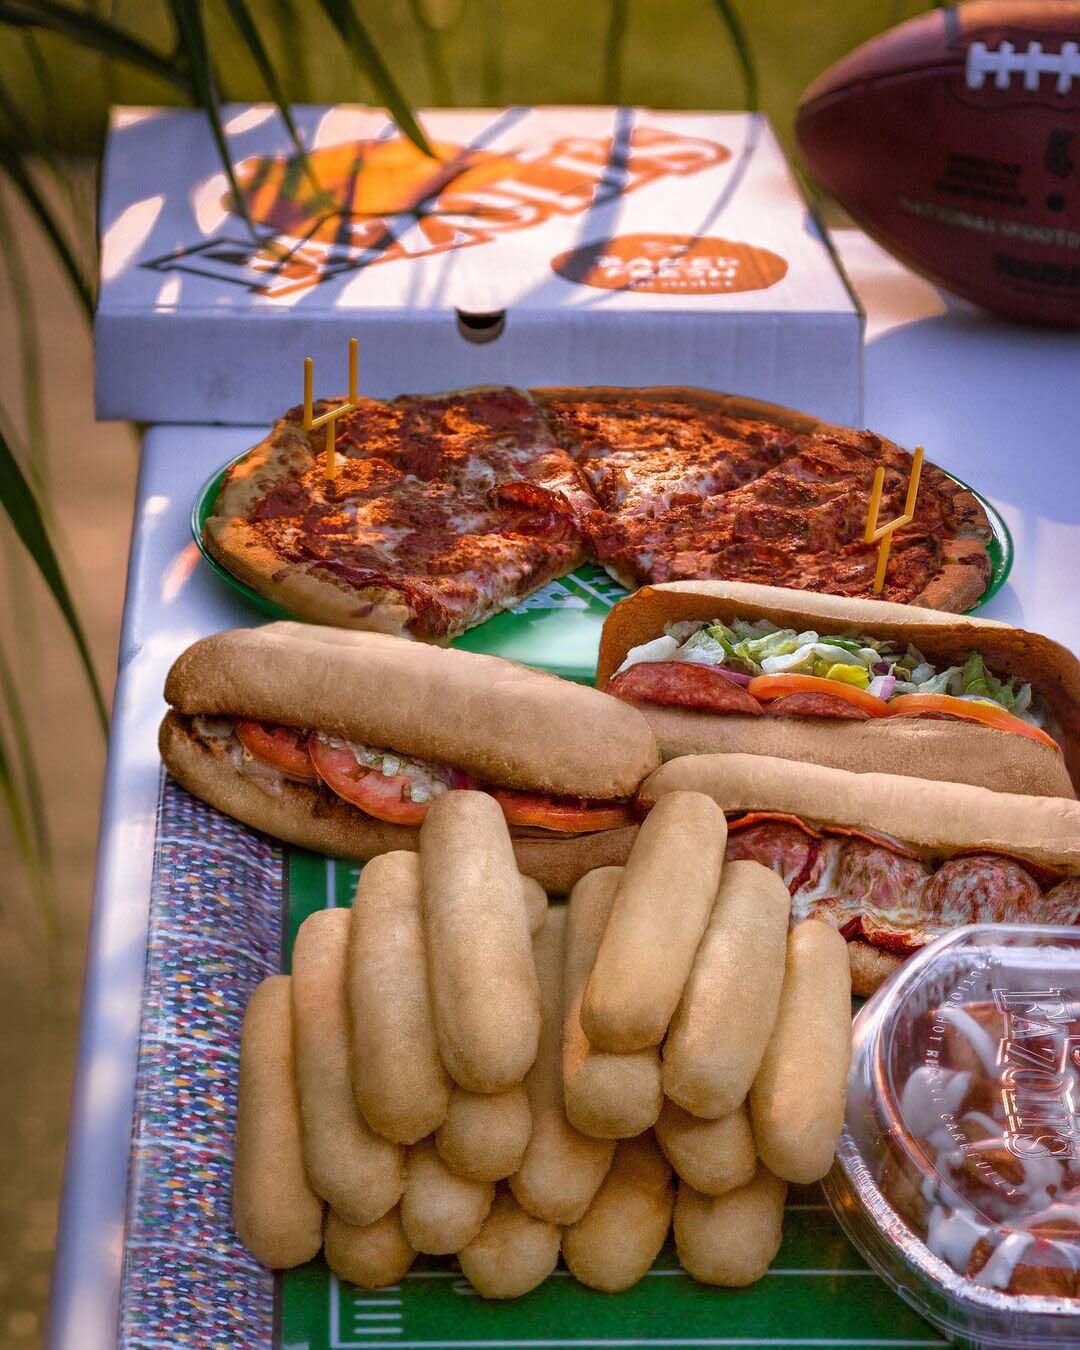 Tailgate table topped with a pizza, two sub sandwiches, breadsticks and a football